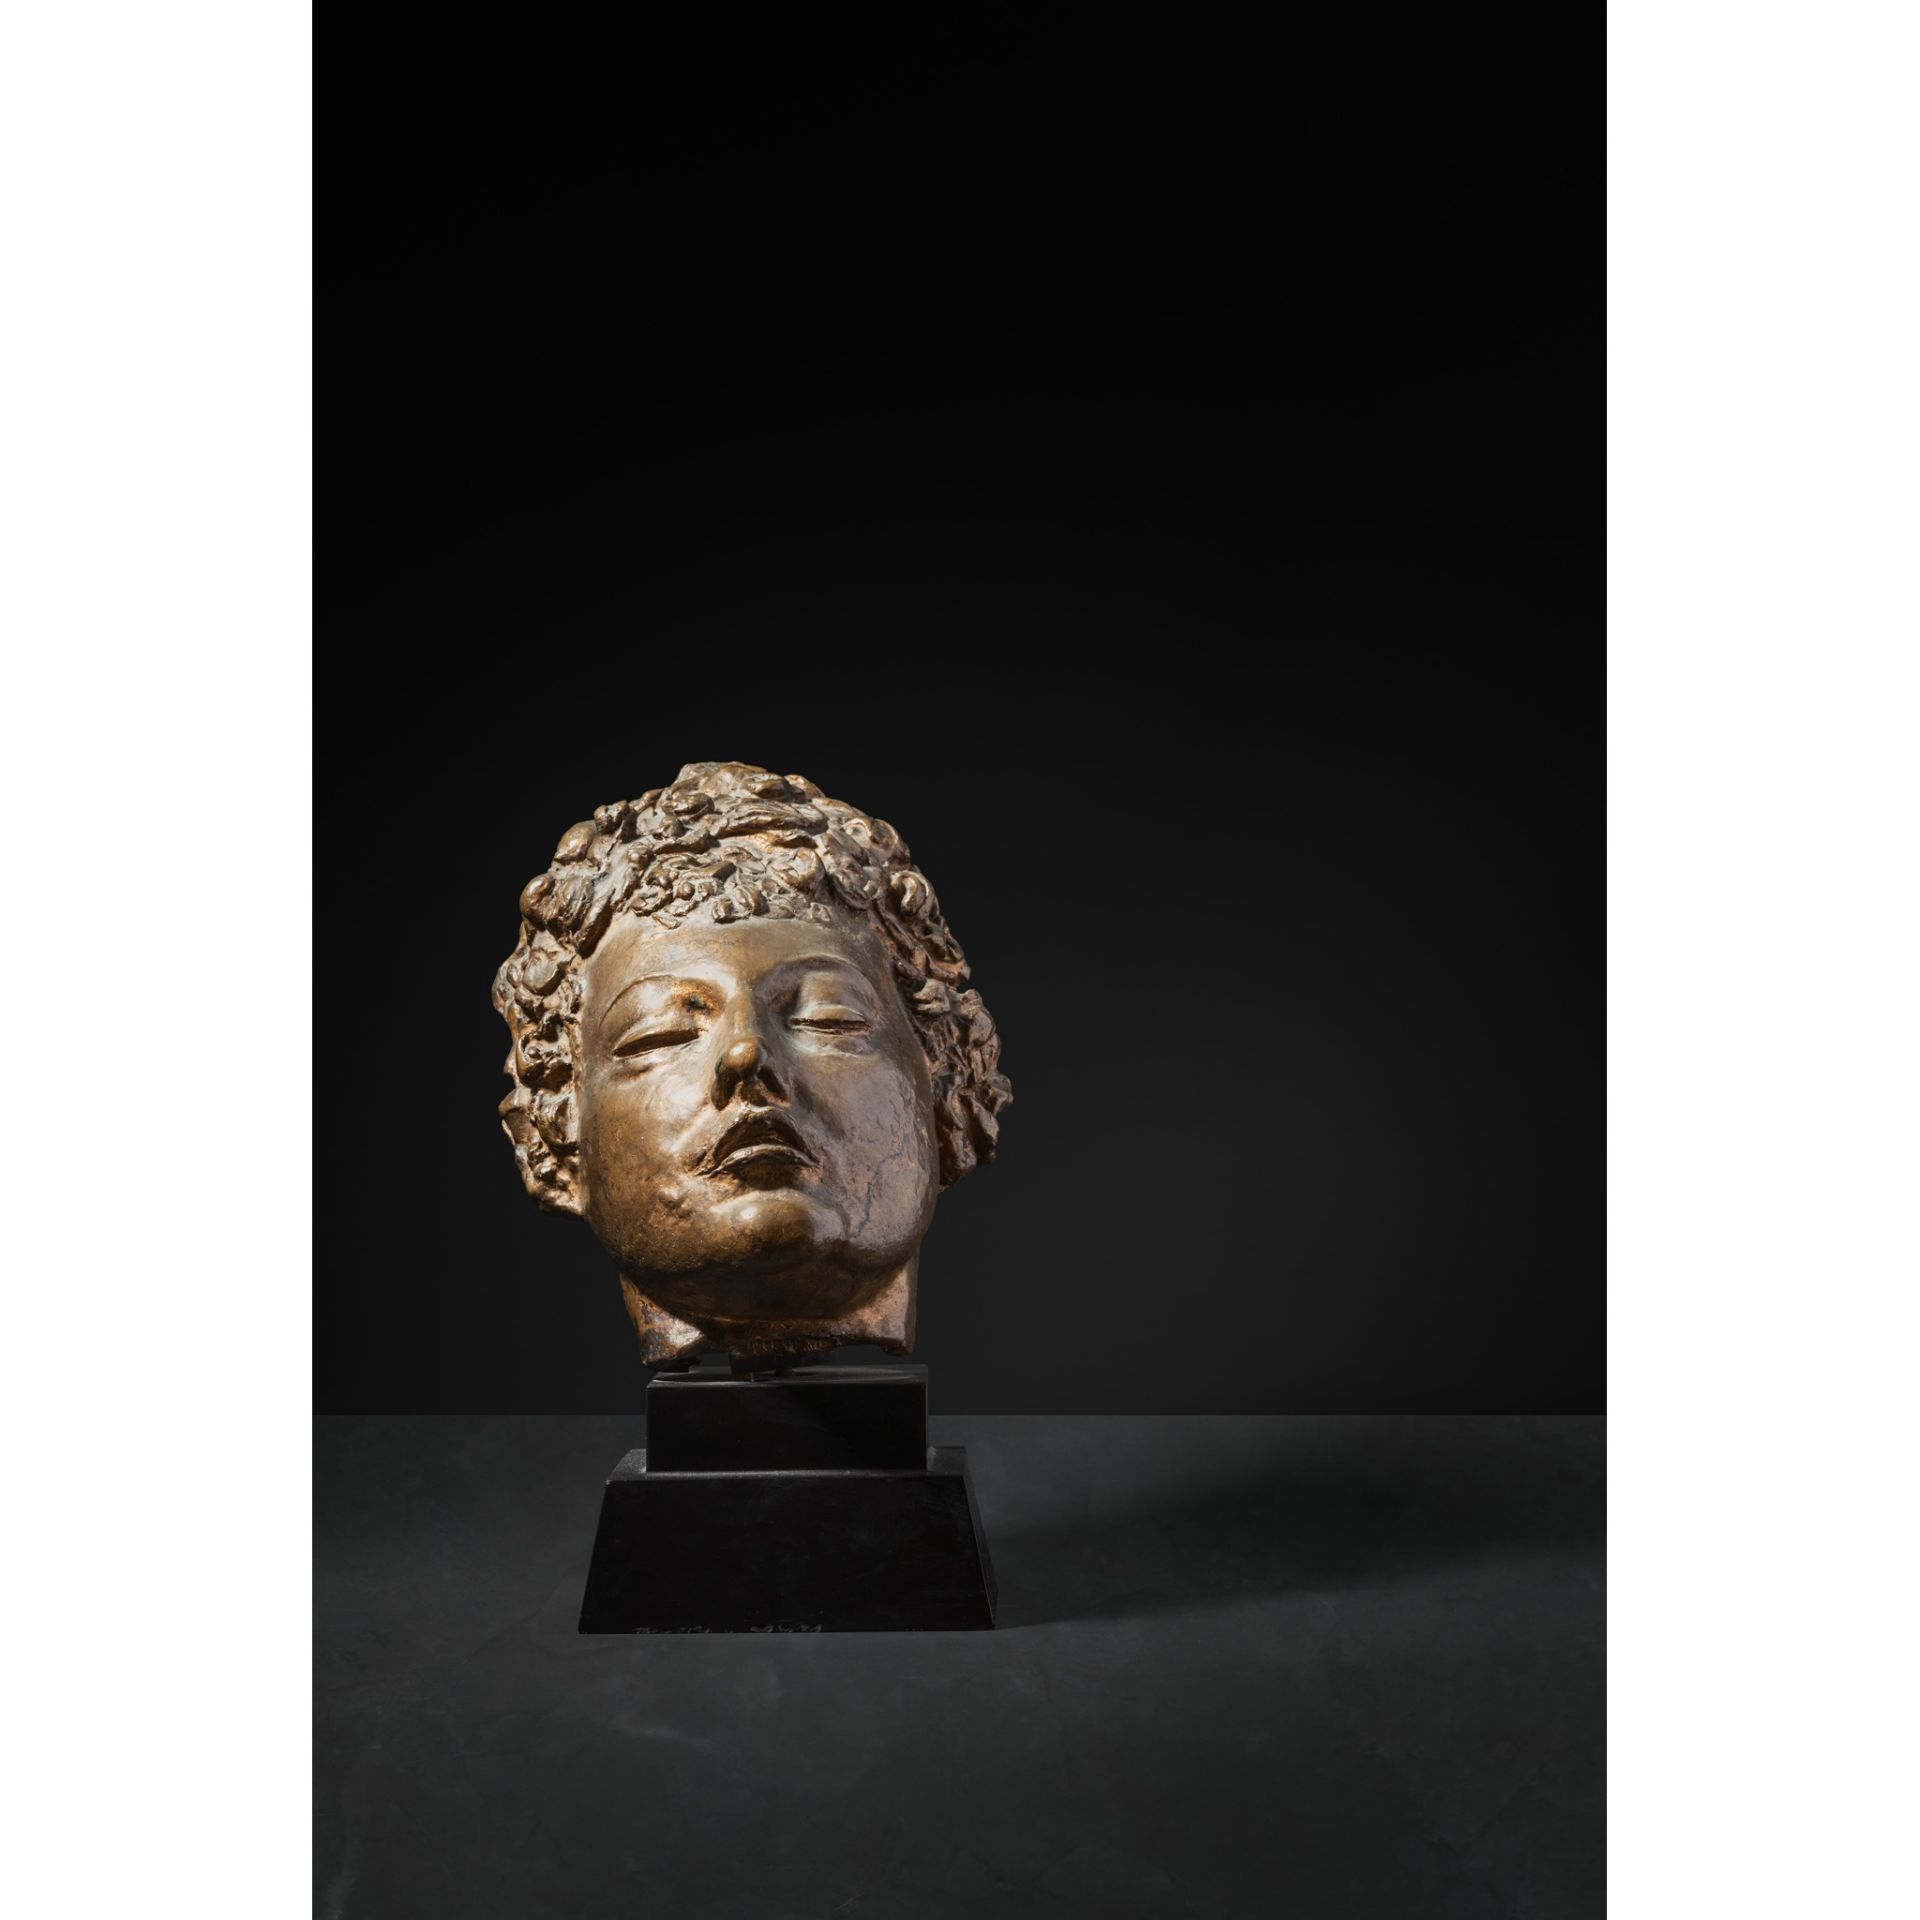 § SIR JACOB EPSTEIN K.B.E. (BRITISH 1880-1959) THIRD PORTRAIT OF MEUM (MASK), CONCEIVED IN 1918 - Image 2 of 3